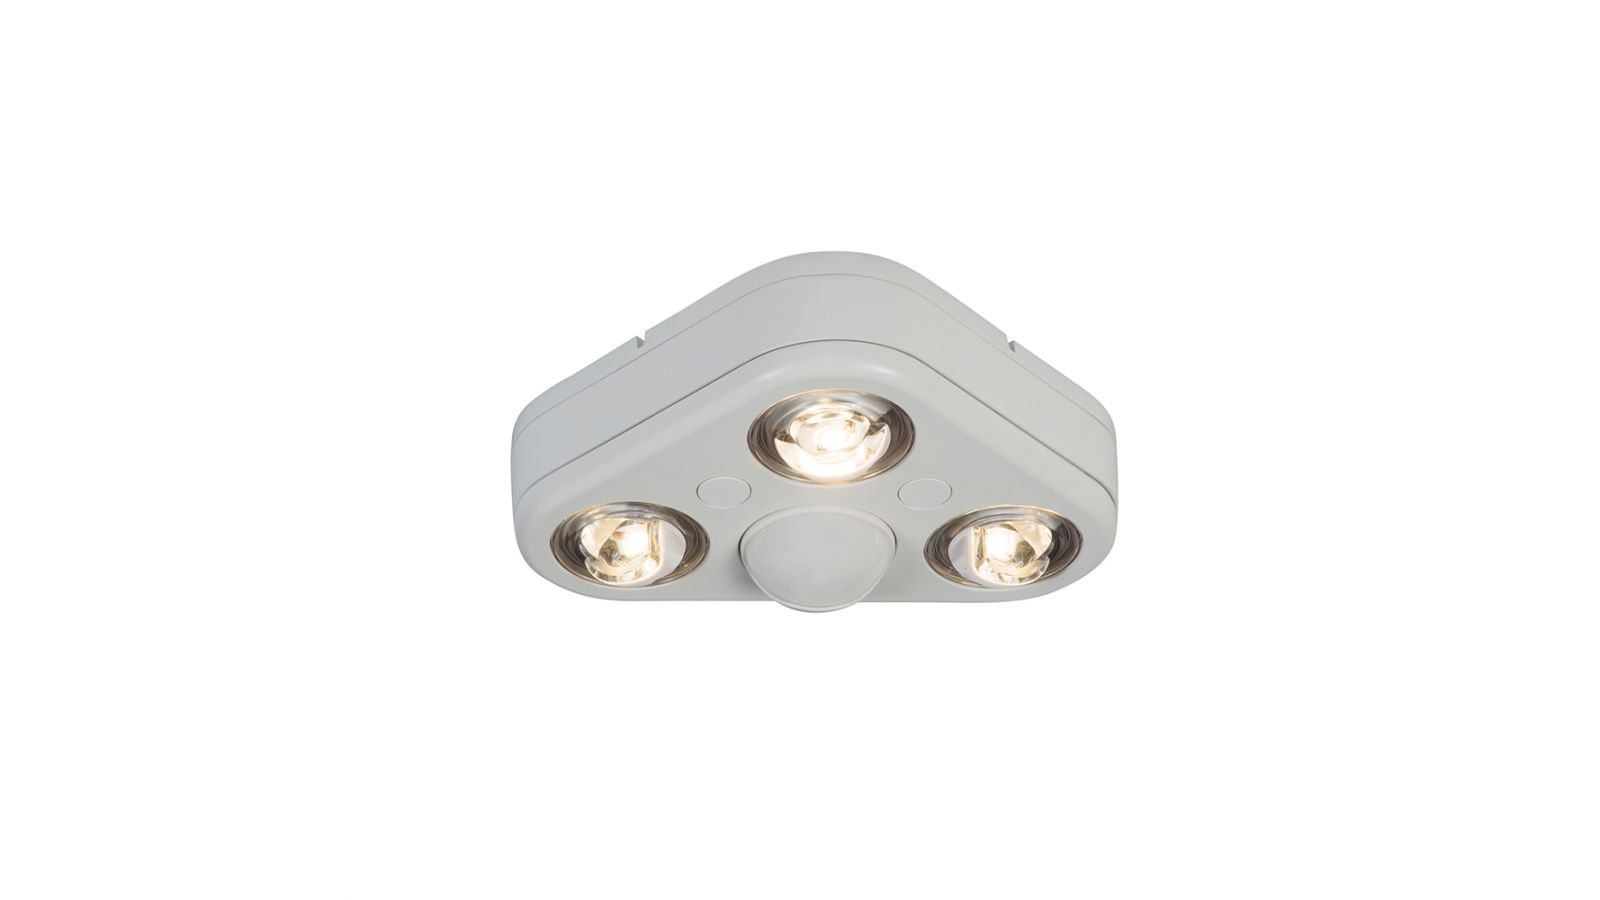 All-Pro™ Revolve™ ™ LED Outdoor Security Luminaires